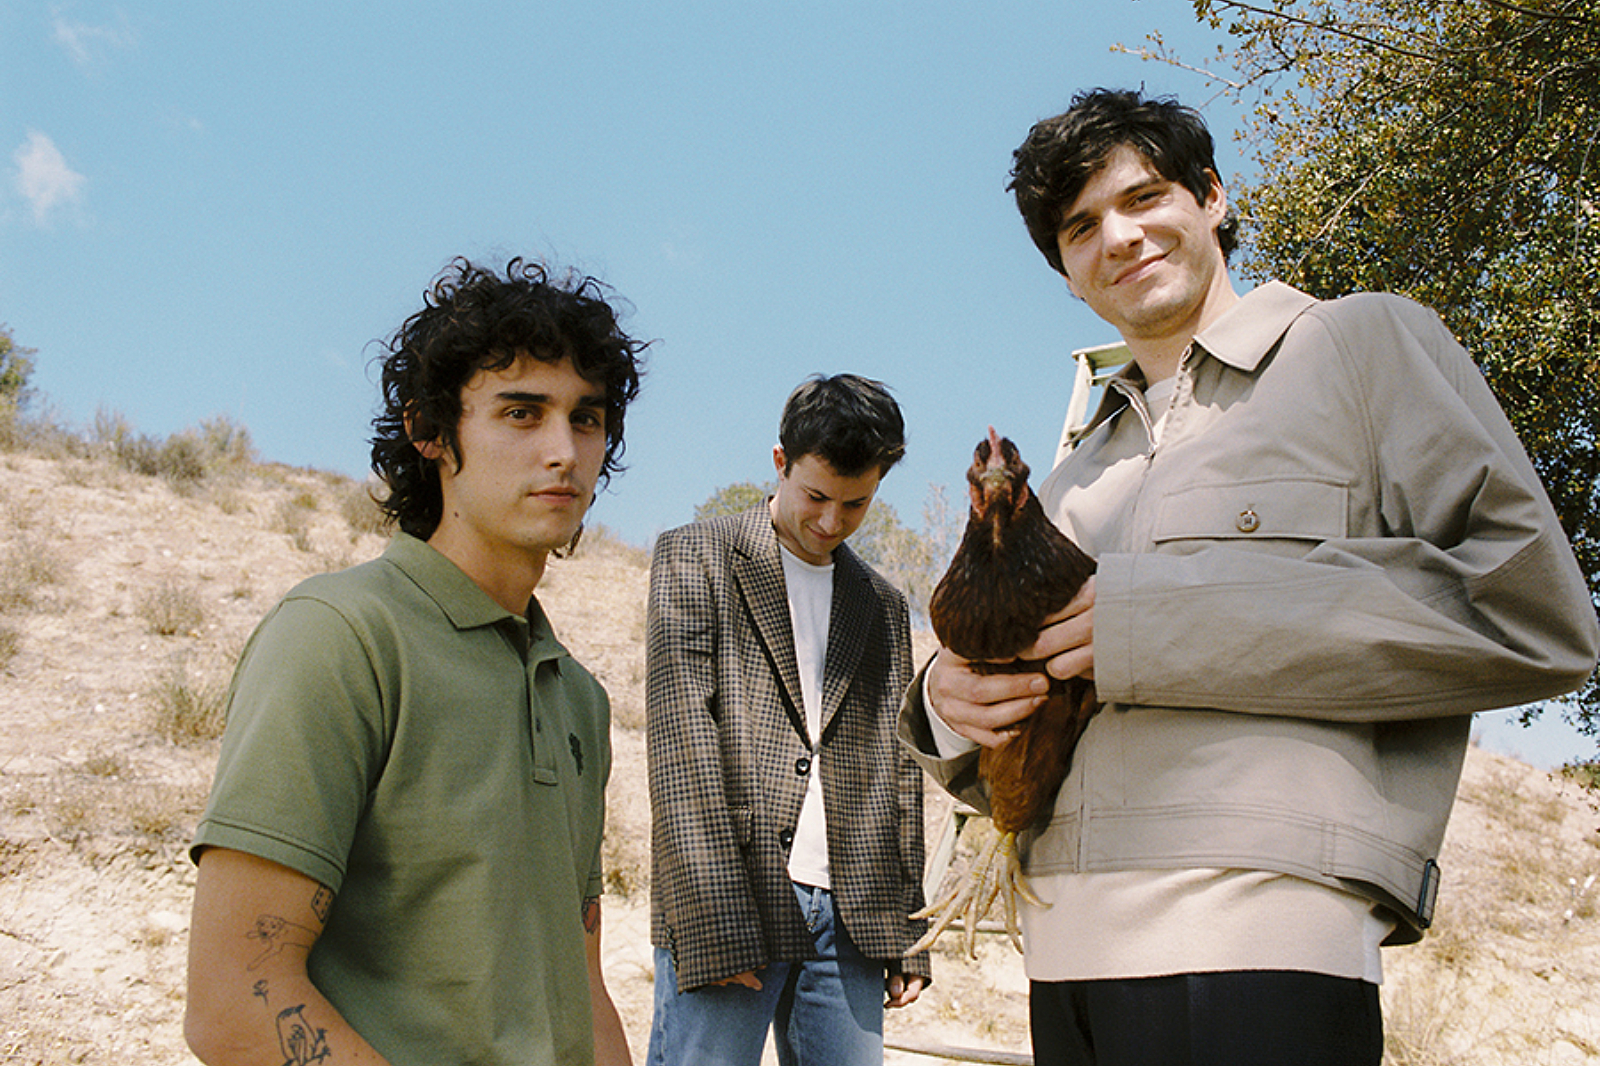 Wallows announce new album 'Tell Me That It's Over'